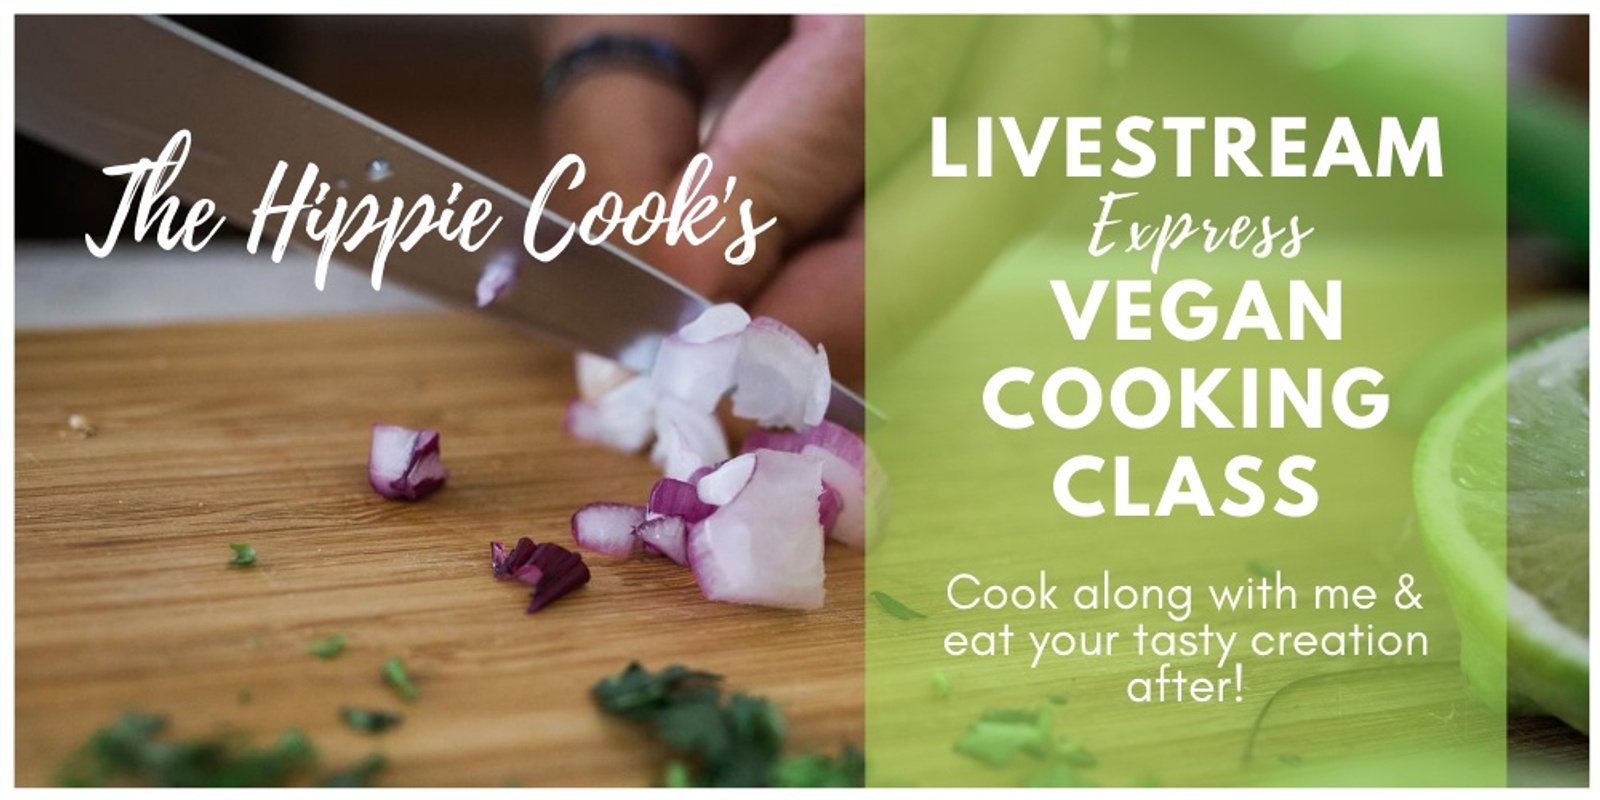 Banner image for Express Livestream Vegan Cooking Class